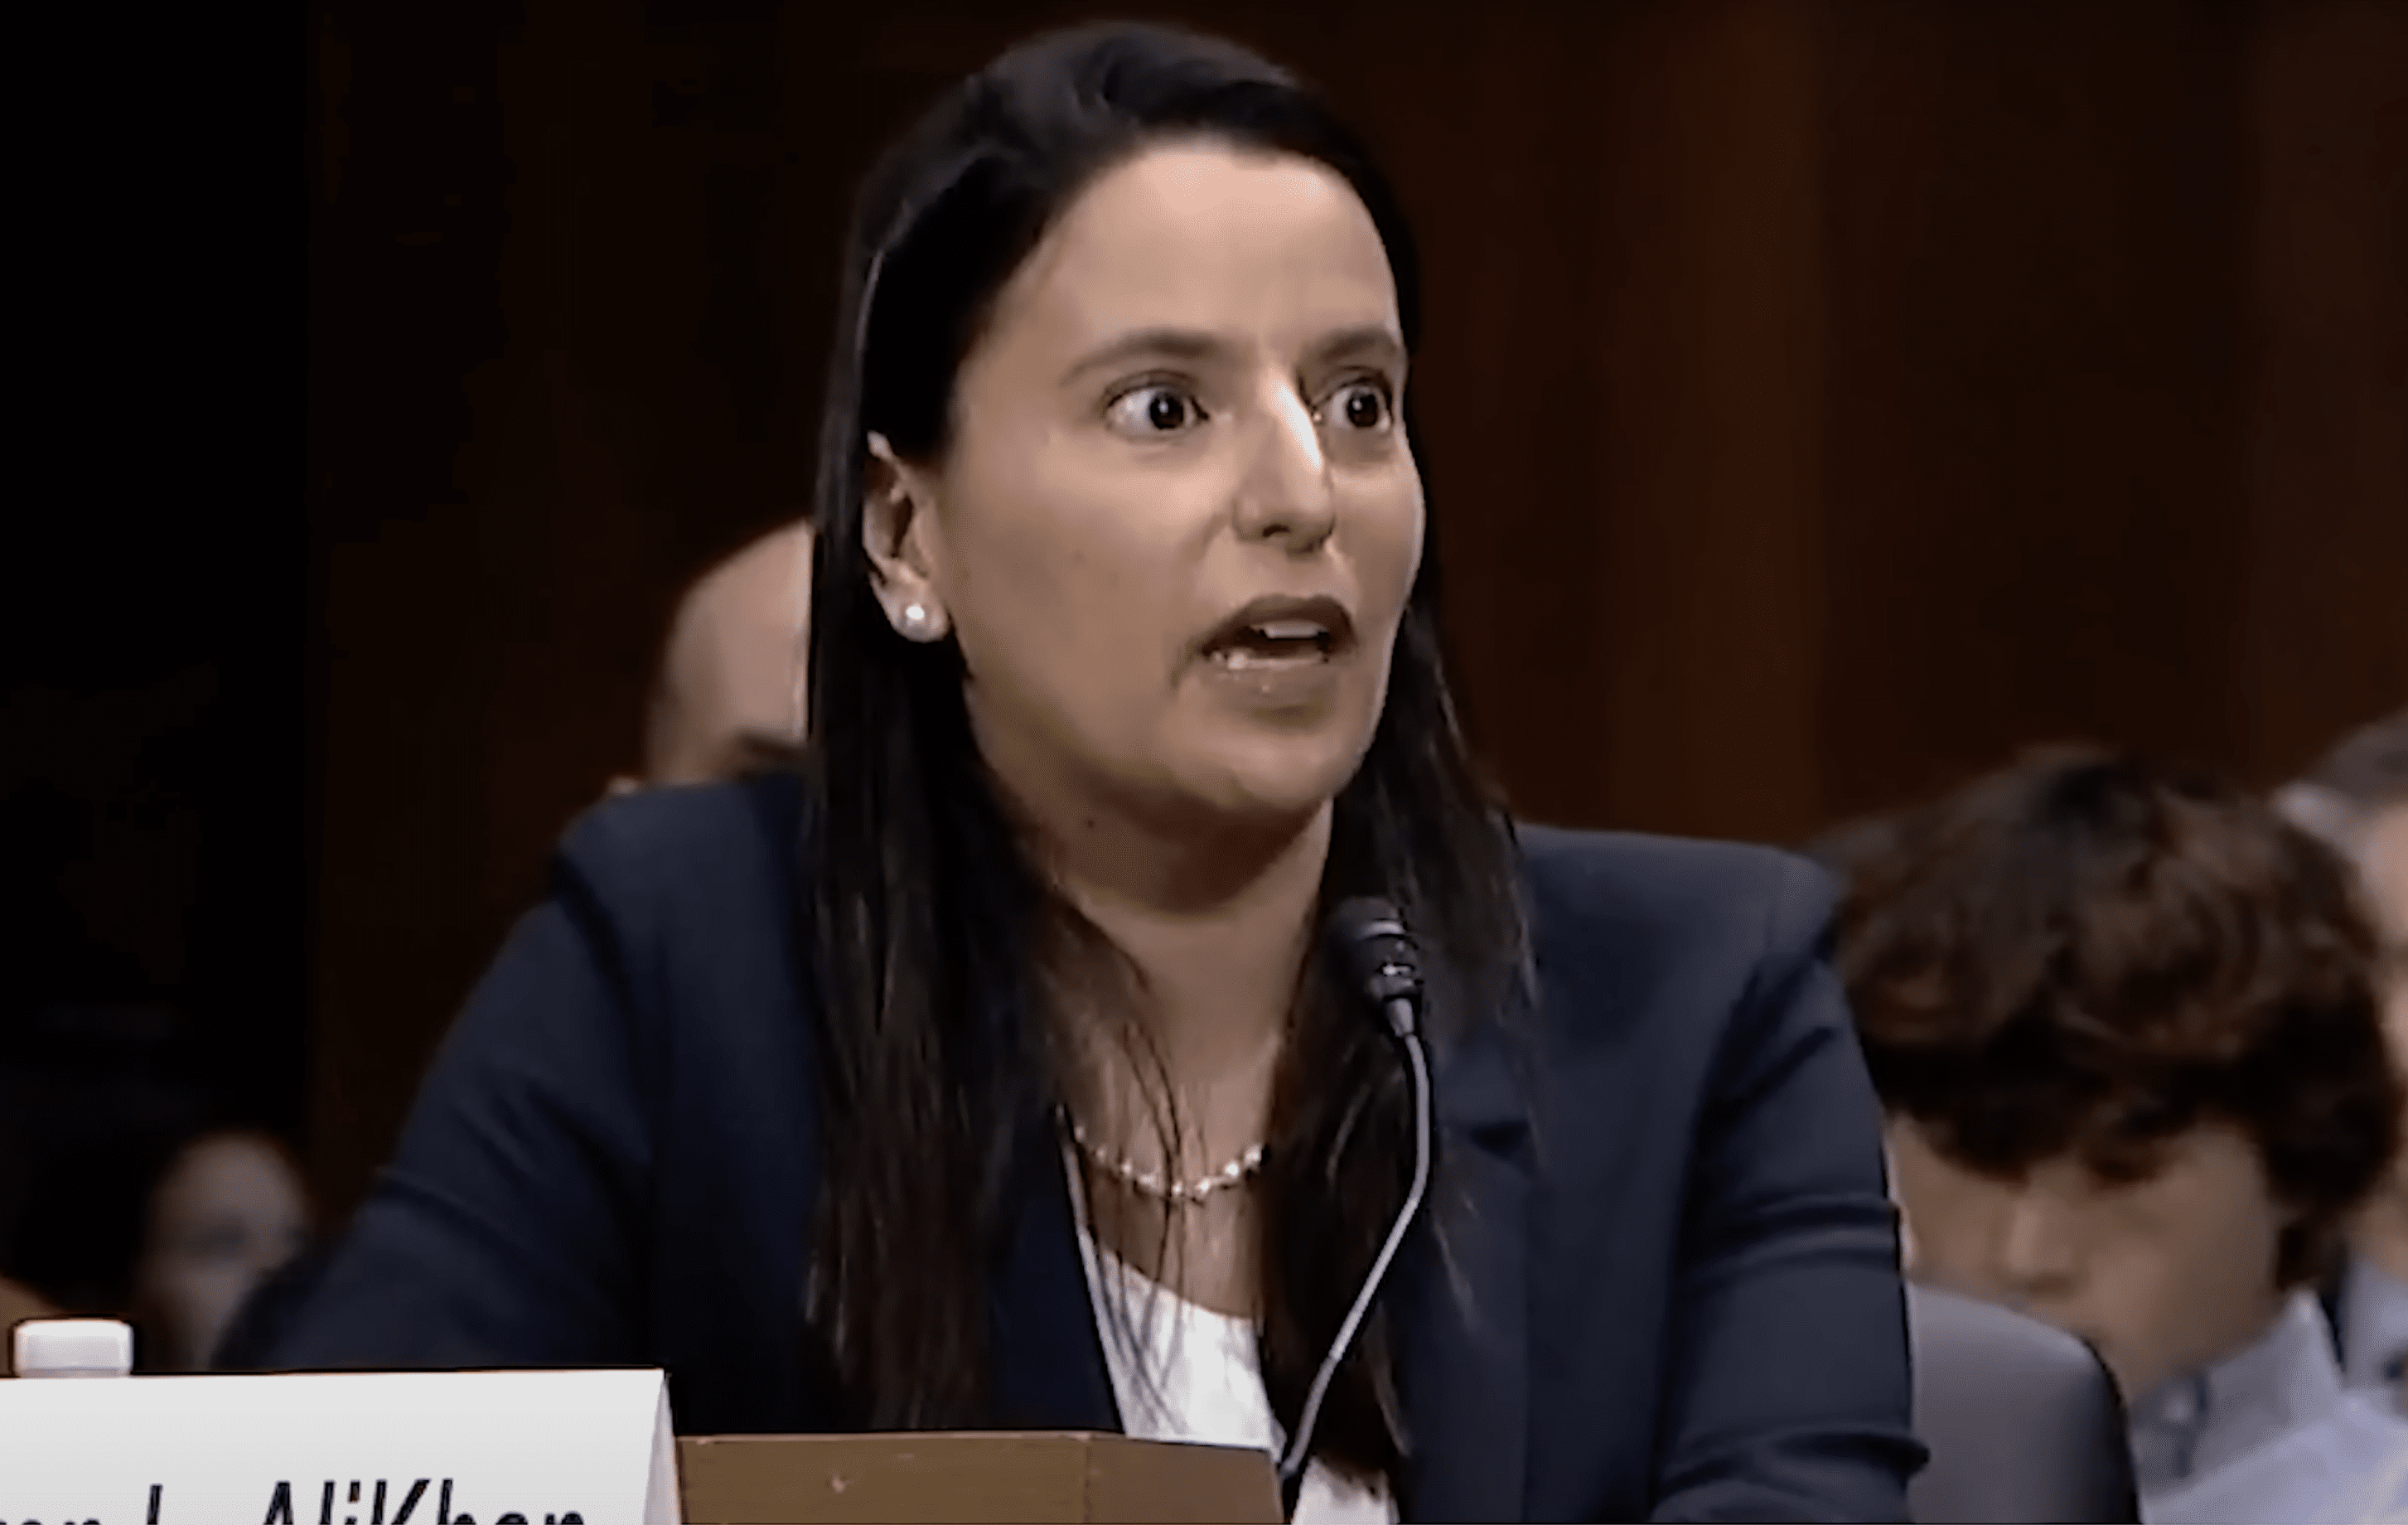 Sen. Hawley Grills Biden’s District Judge Nominee for D.C on Religious Discrimination and COVID-19 Restrictions During Confirmation Hearing (VIDEO)